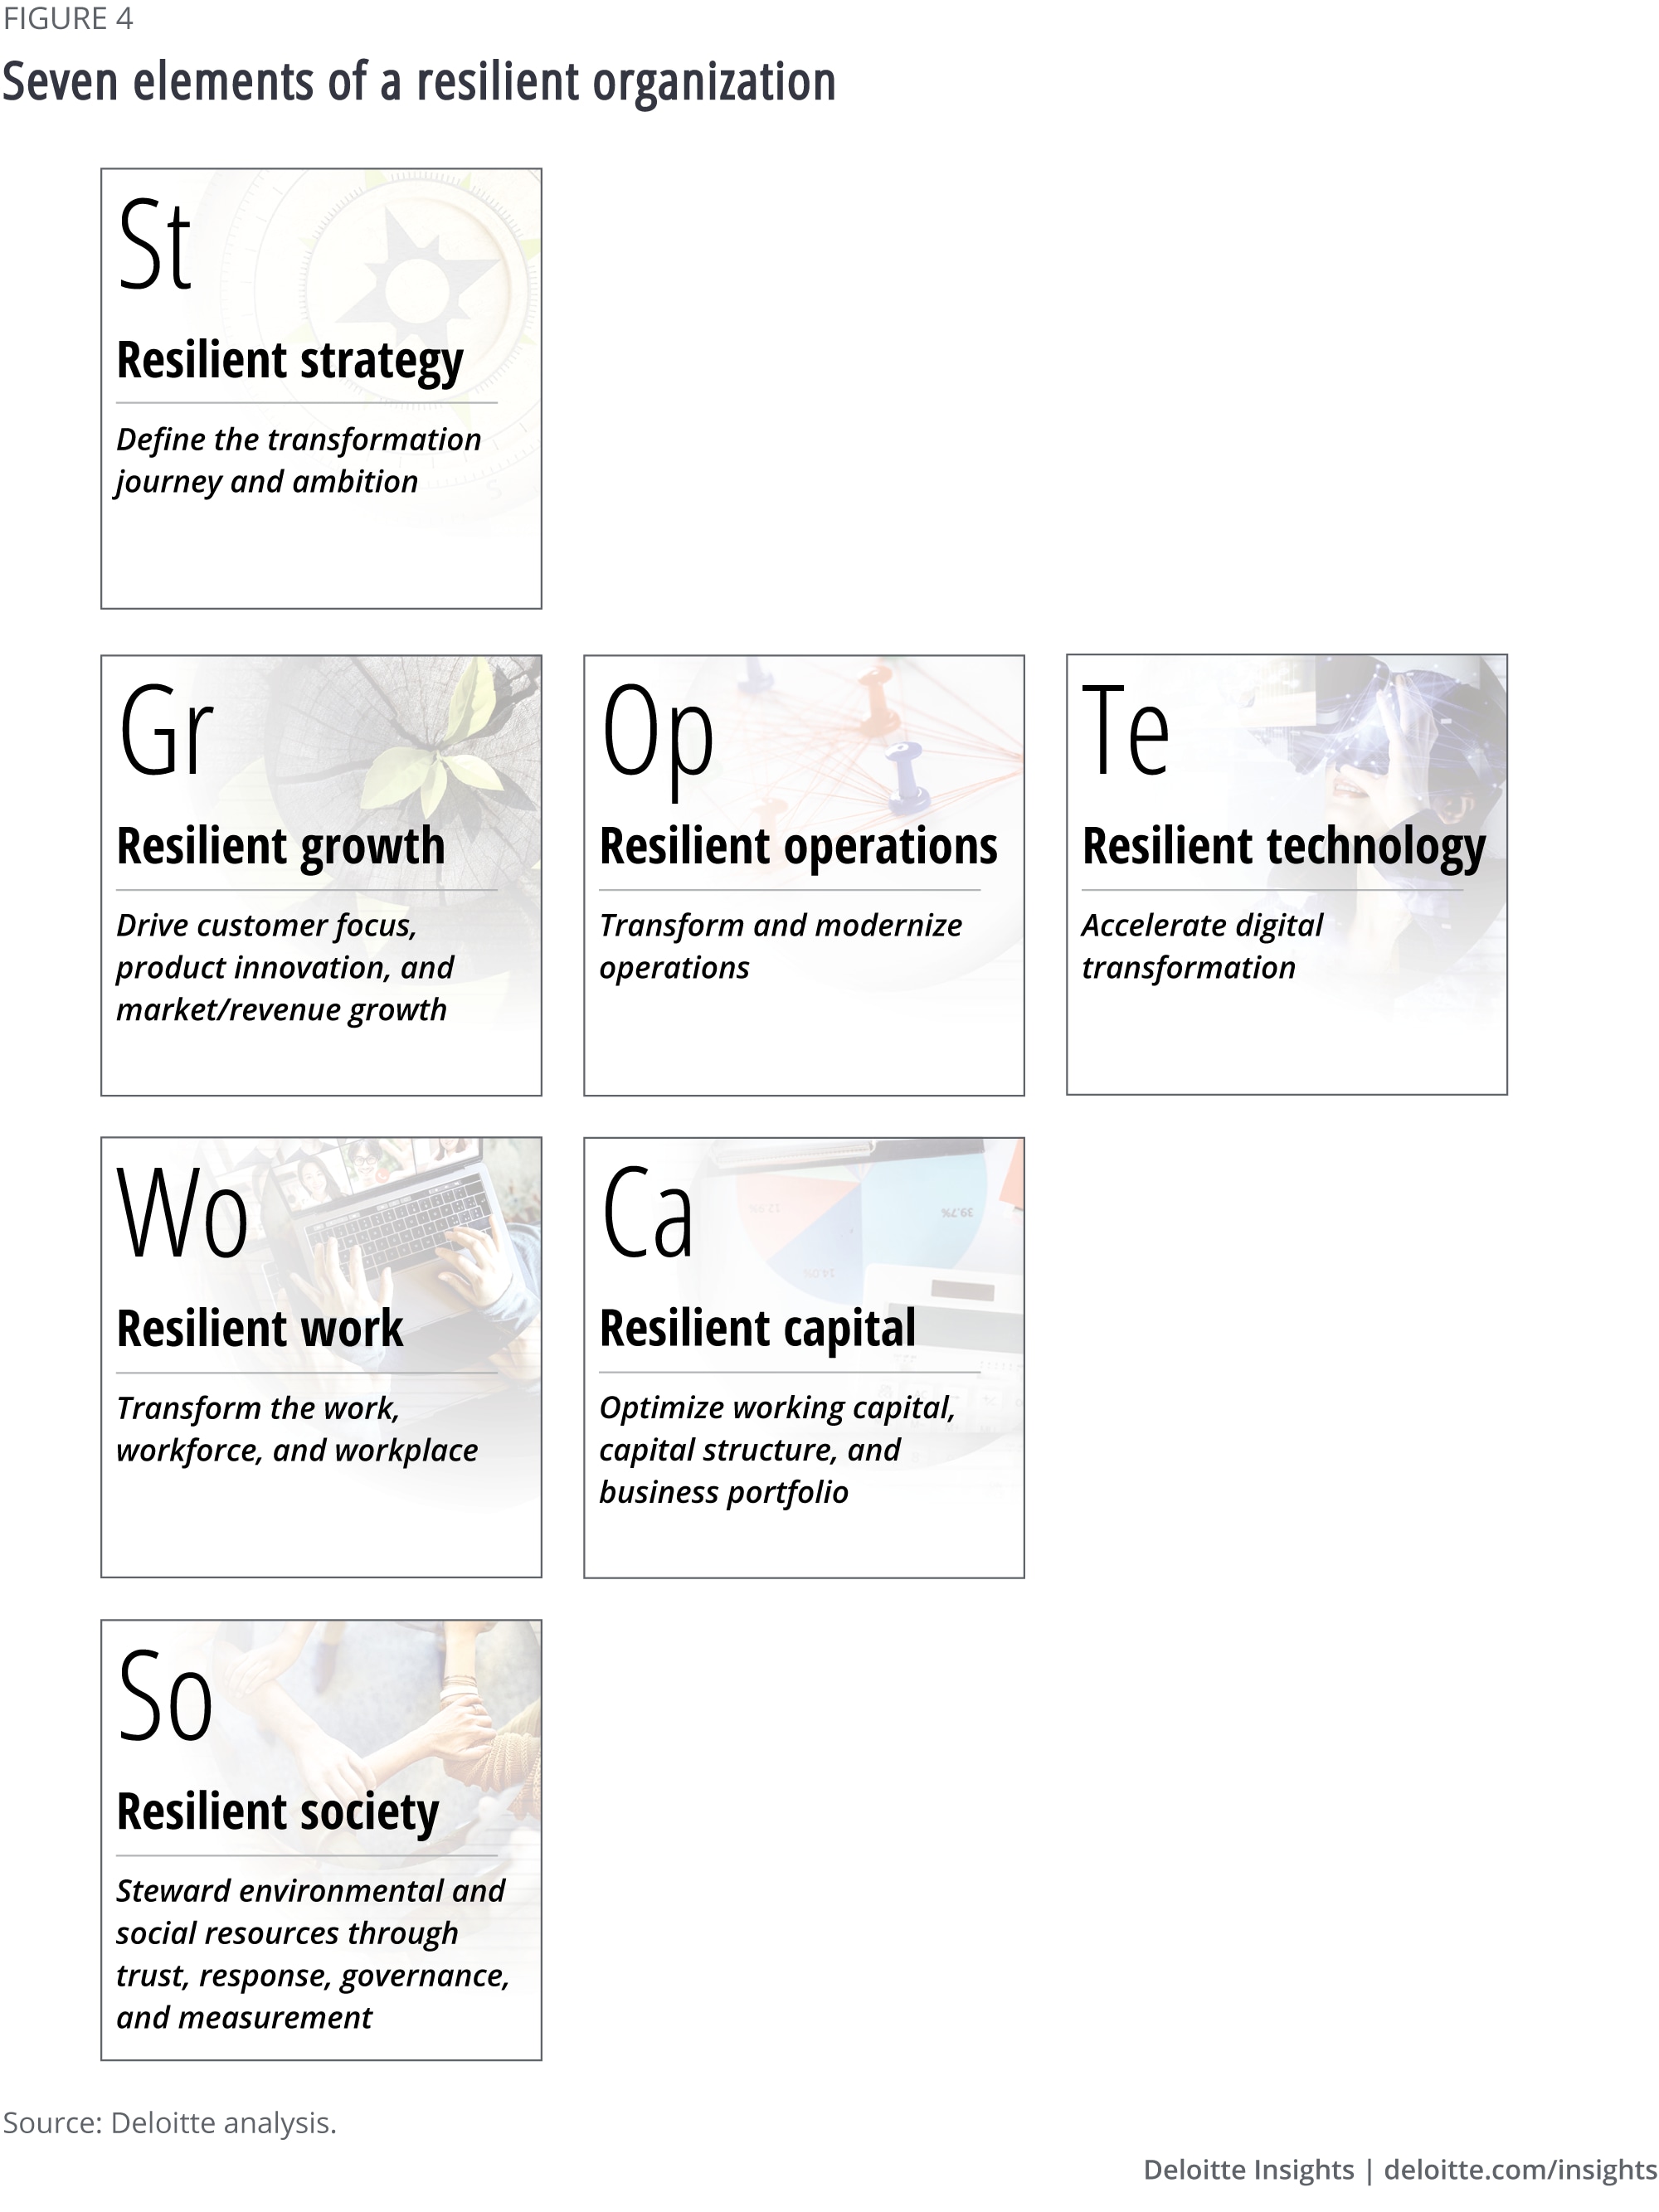 Seven elements of a resilient organization